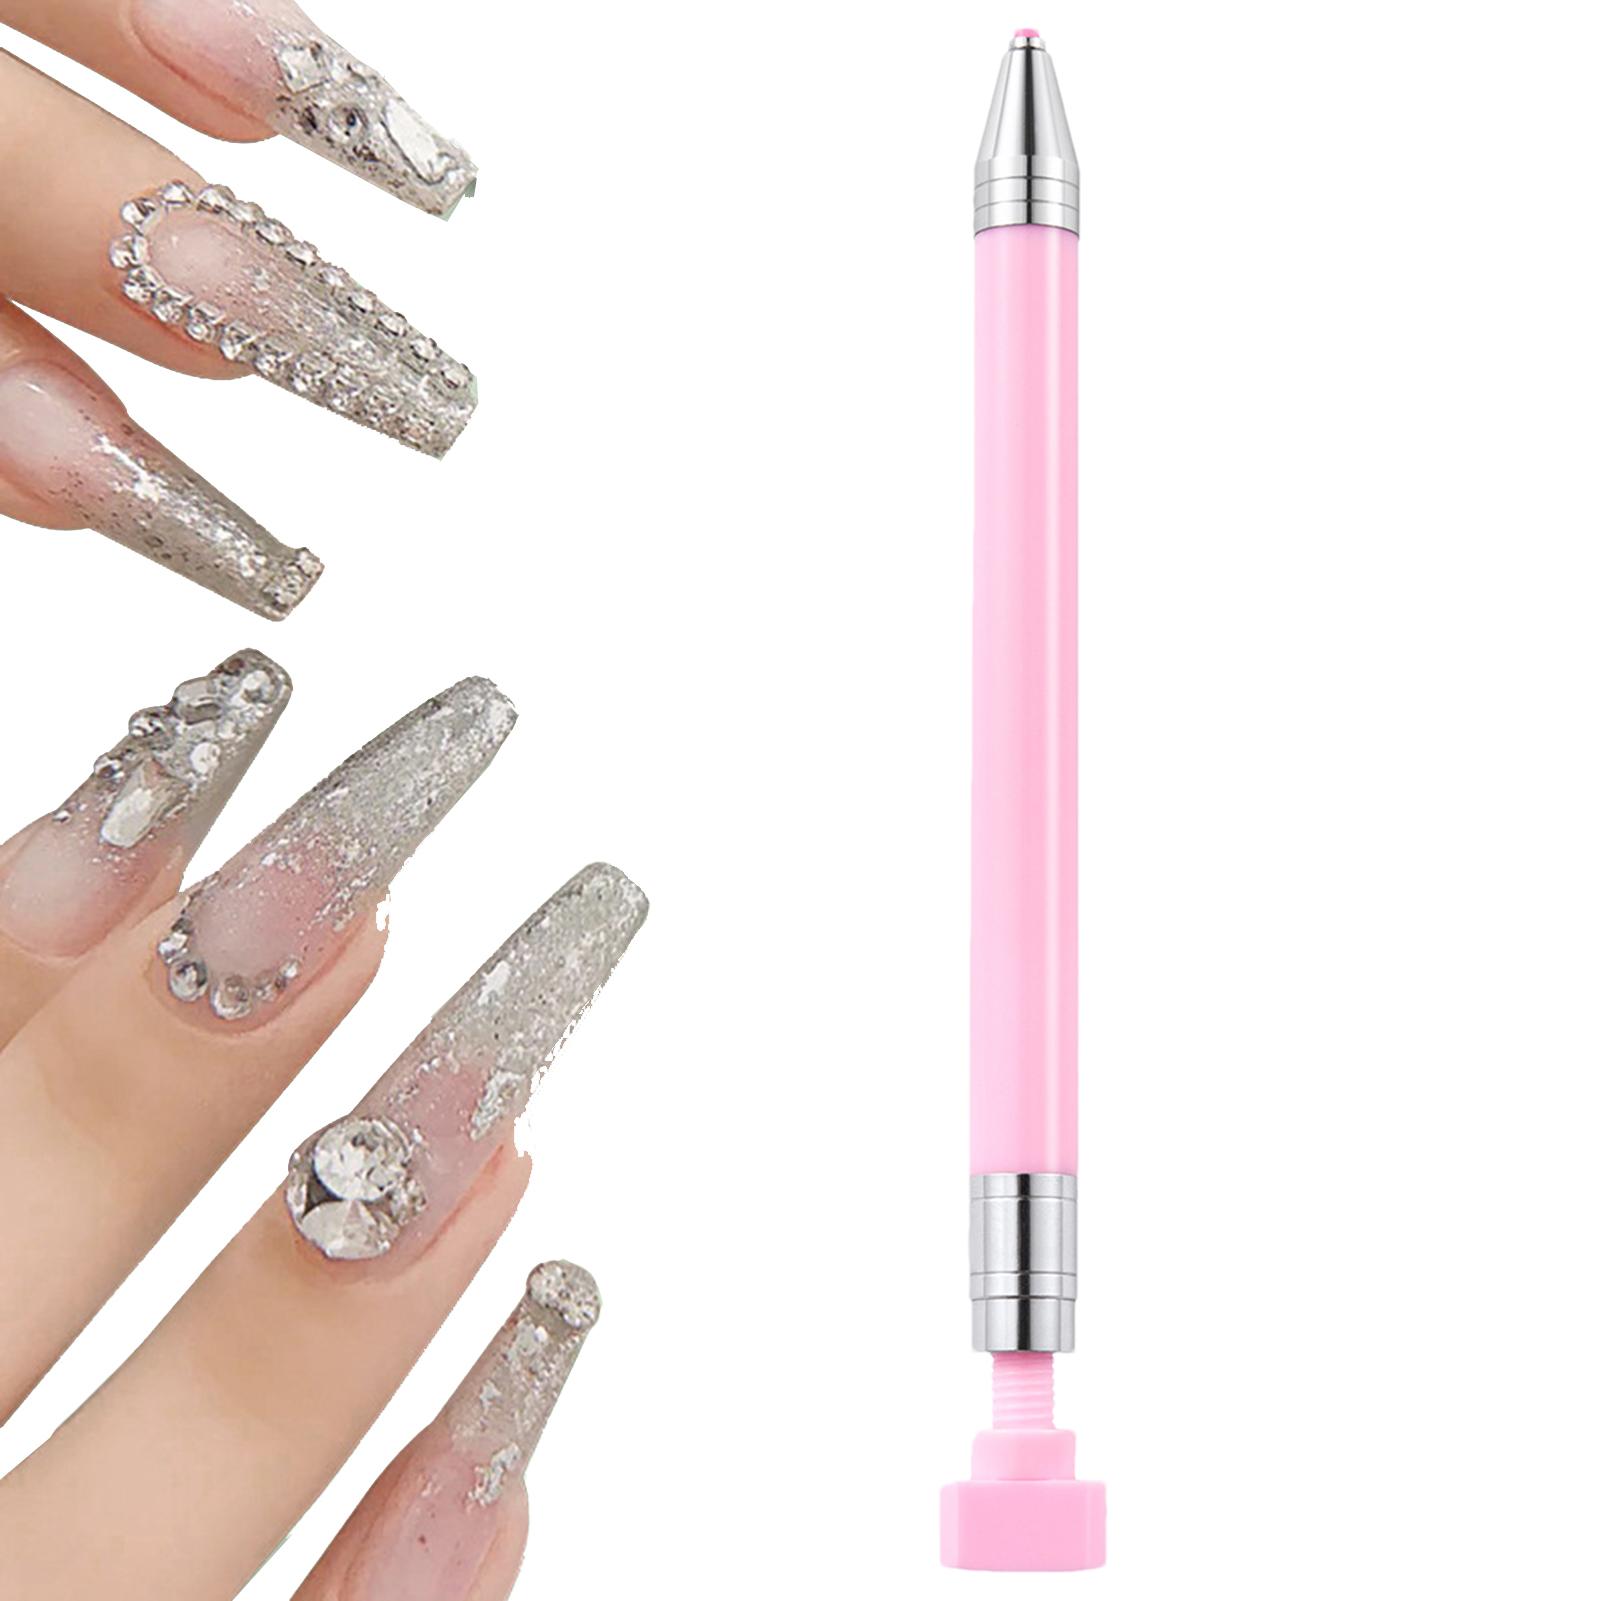 Lacyie Rhinestone Wax Pen | Dual-Ended Nail Dotting Pen | Gems Crystals Studs Applicator Jewel Picker Tool for Nail Art DIY Decoration, Size: 13.5, Pink